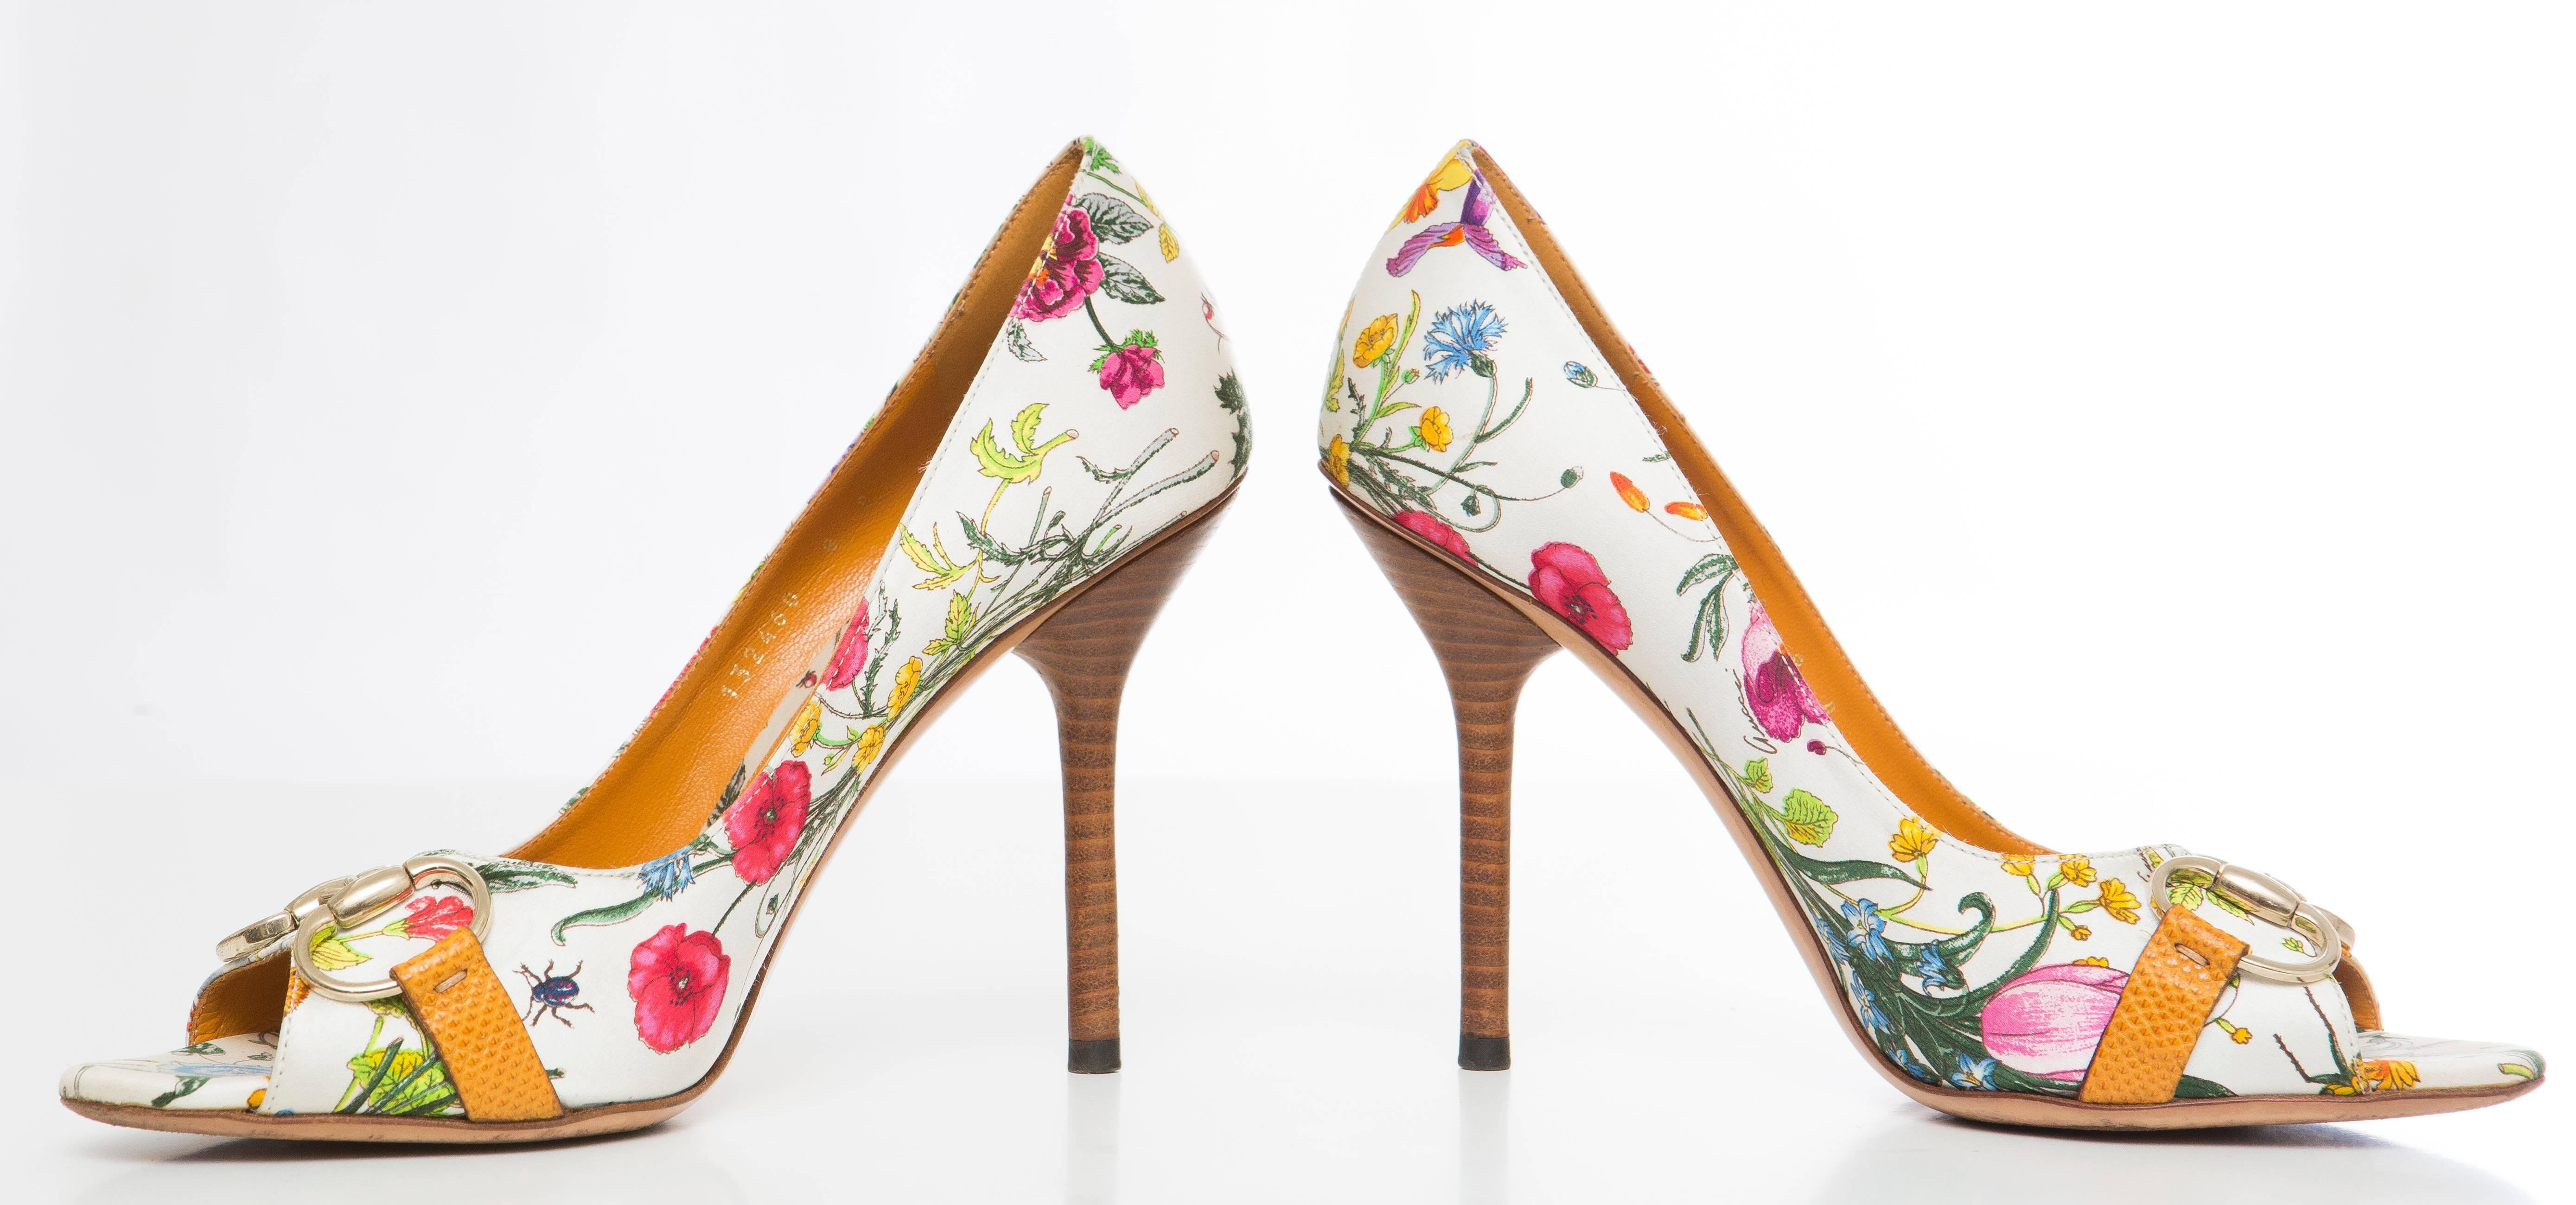 Gucci Flora and Fauna satin peep-toe pumps with gold-tone horsebit adornment at tops, tonal stitching and stacked stiletto heels.

IT. 38
US. 8

Heels: 4.25